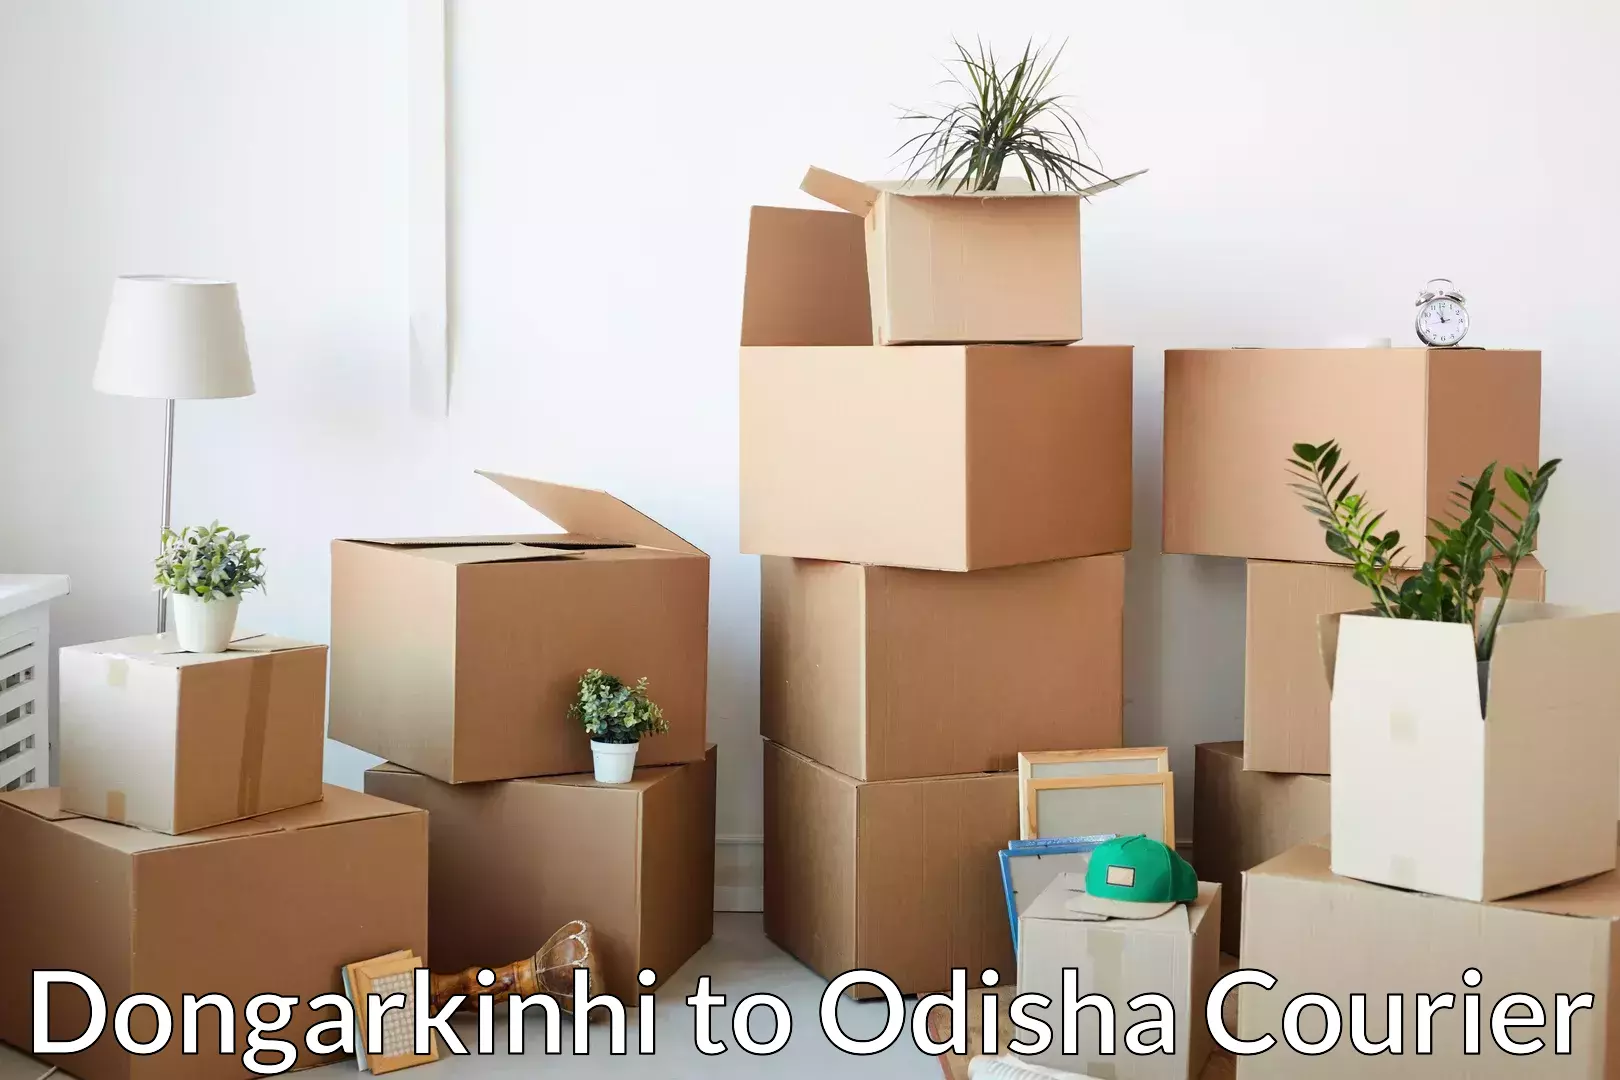 Full home moving services Dongarkinhi to Dandisahi